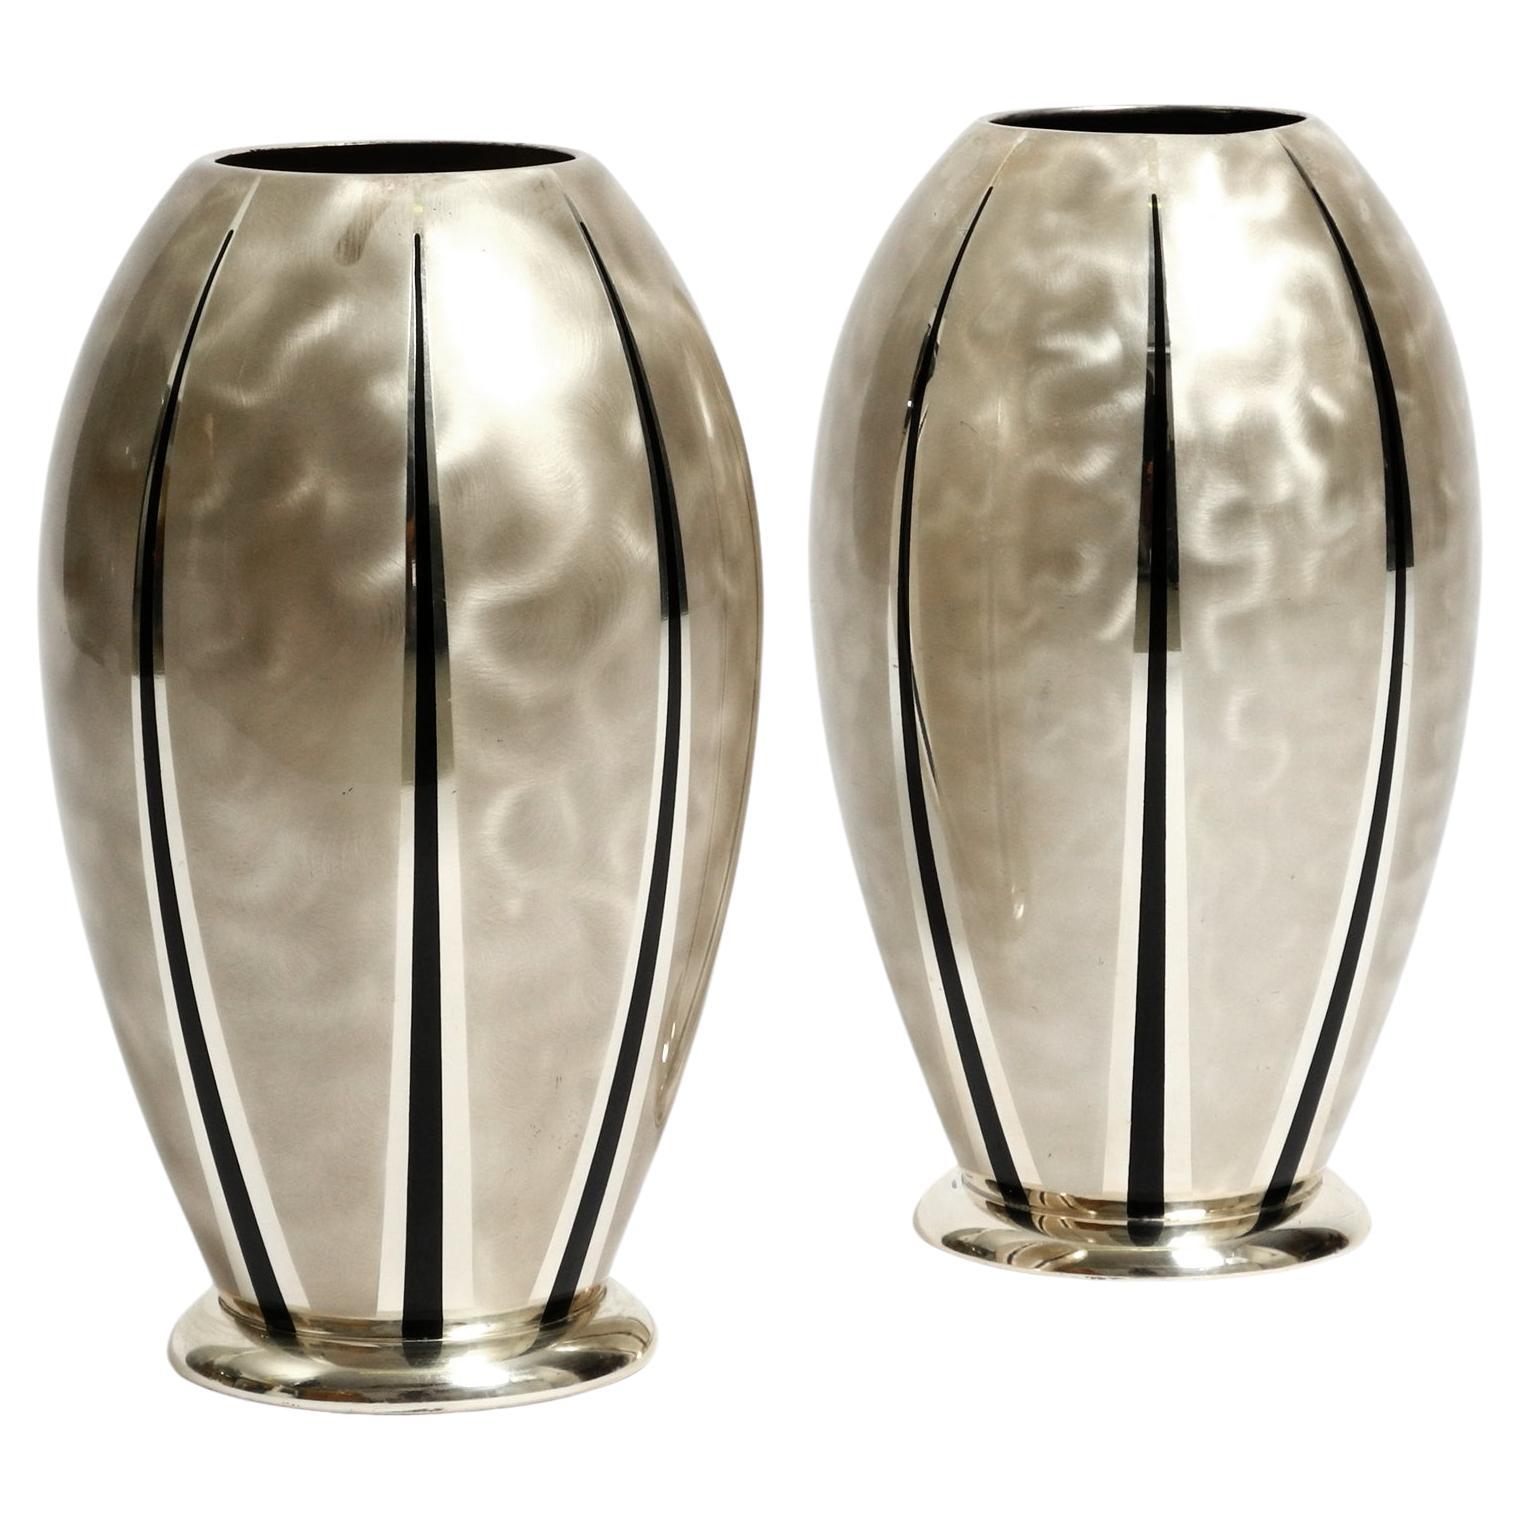 Pair of Mid Century Modern WMF Ikora table vases made of silver-plated brass For Sale